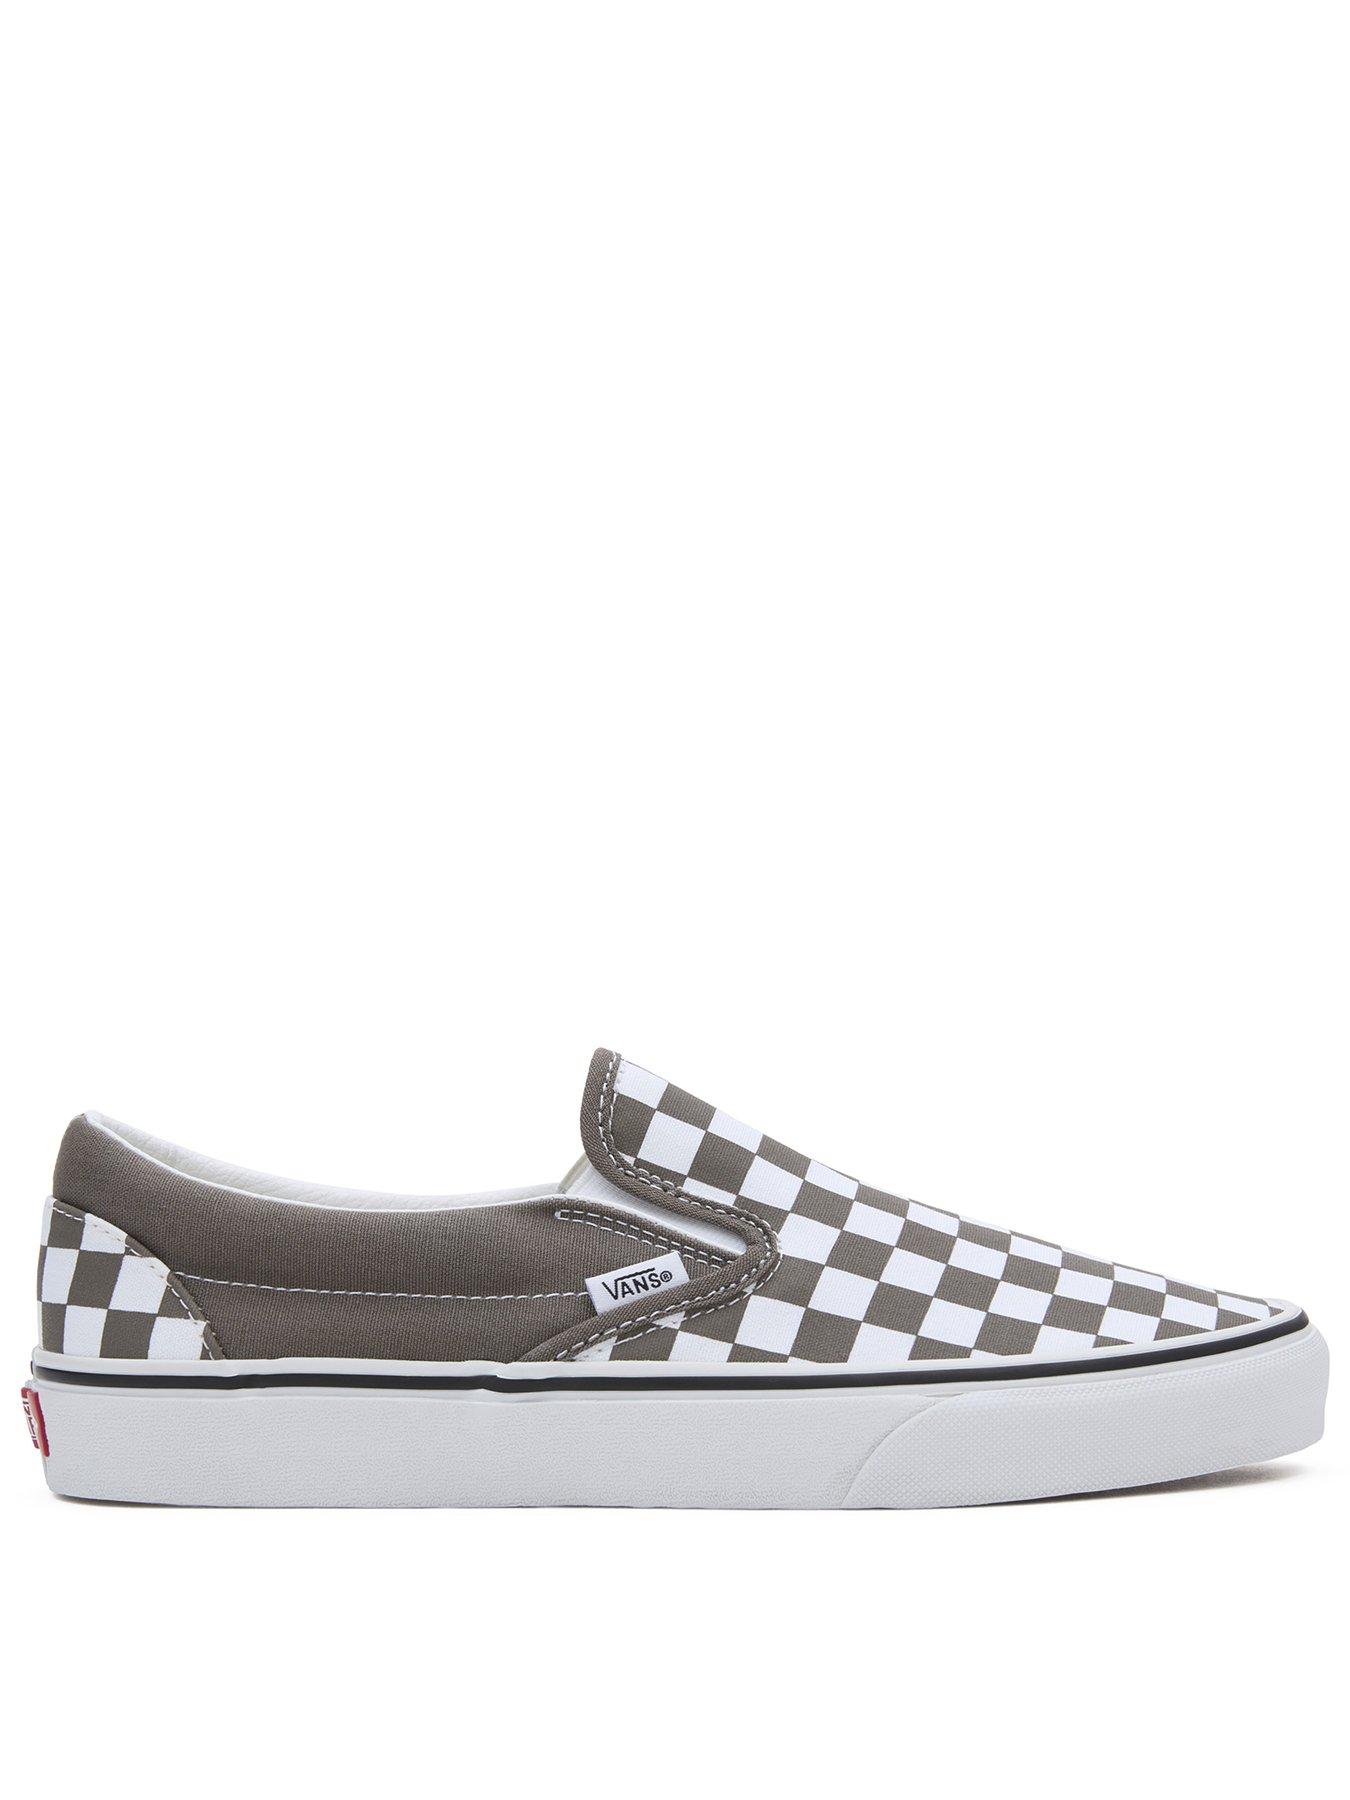 Vans Shoes & Clothing